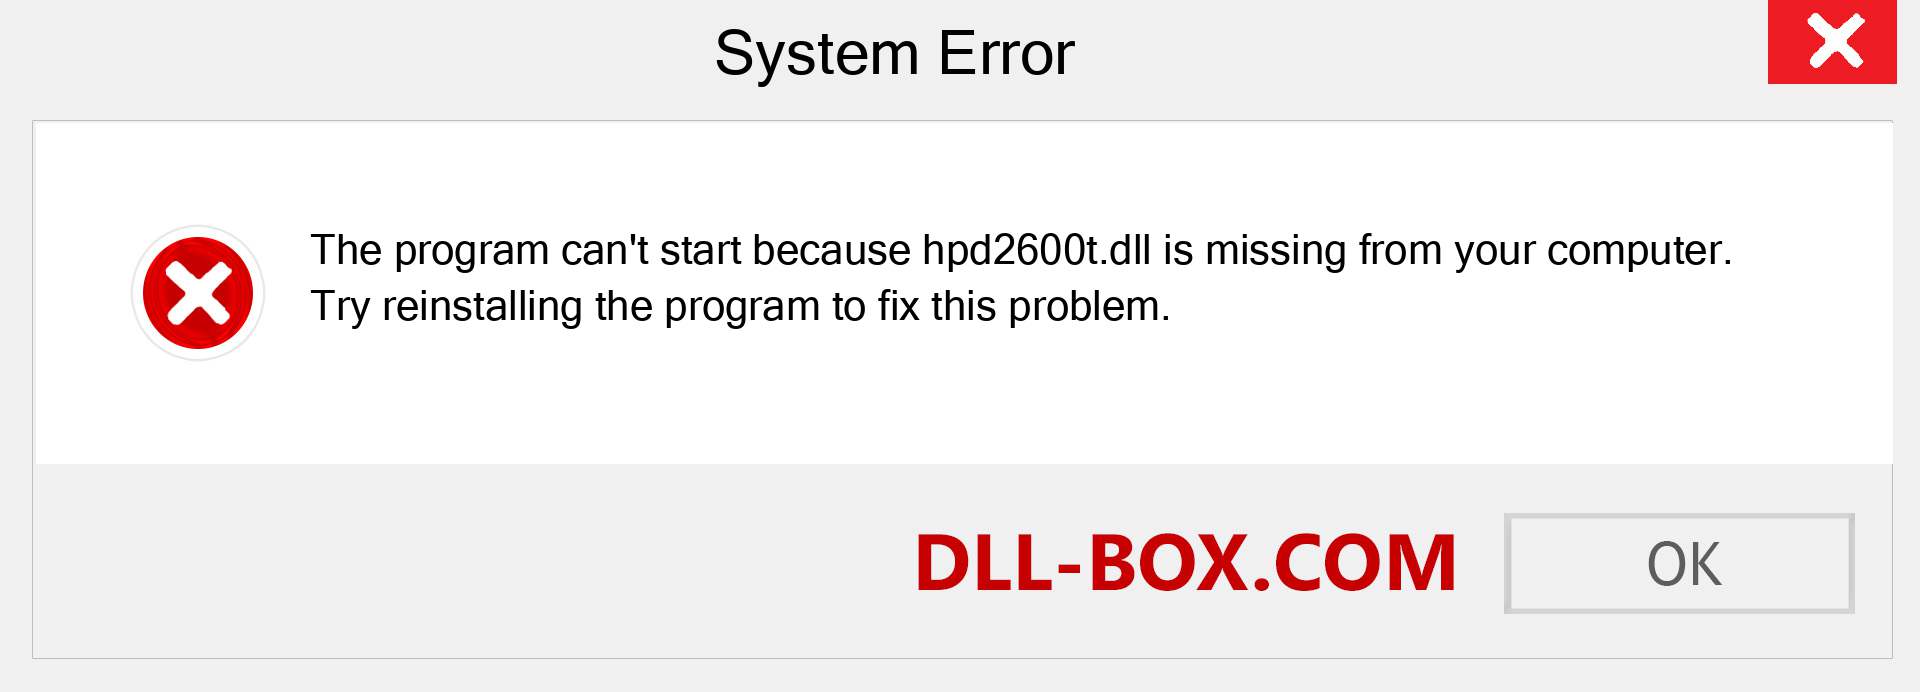  hpd2600t.dll file is missing?. Download for Windows 7, 8, 10 - Fix  hpd2600t dll Missing Error on Windows, photos, images